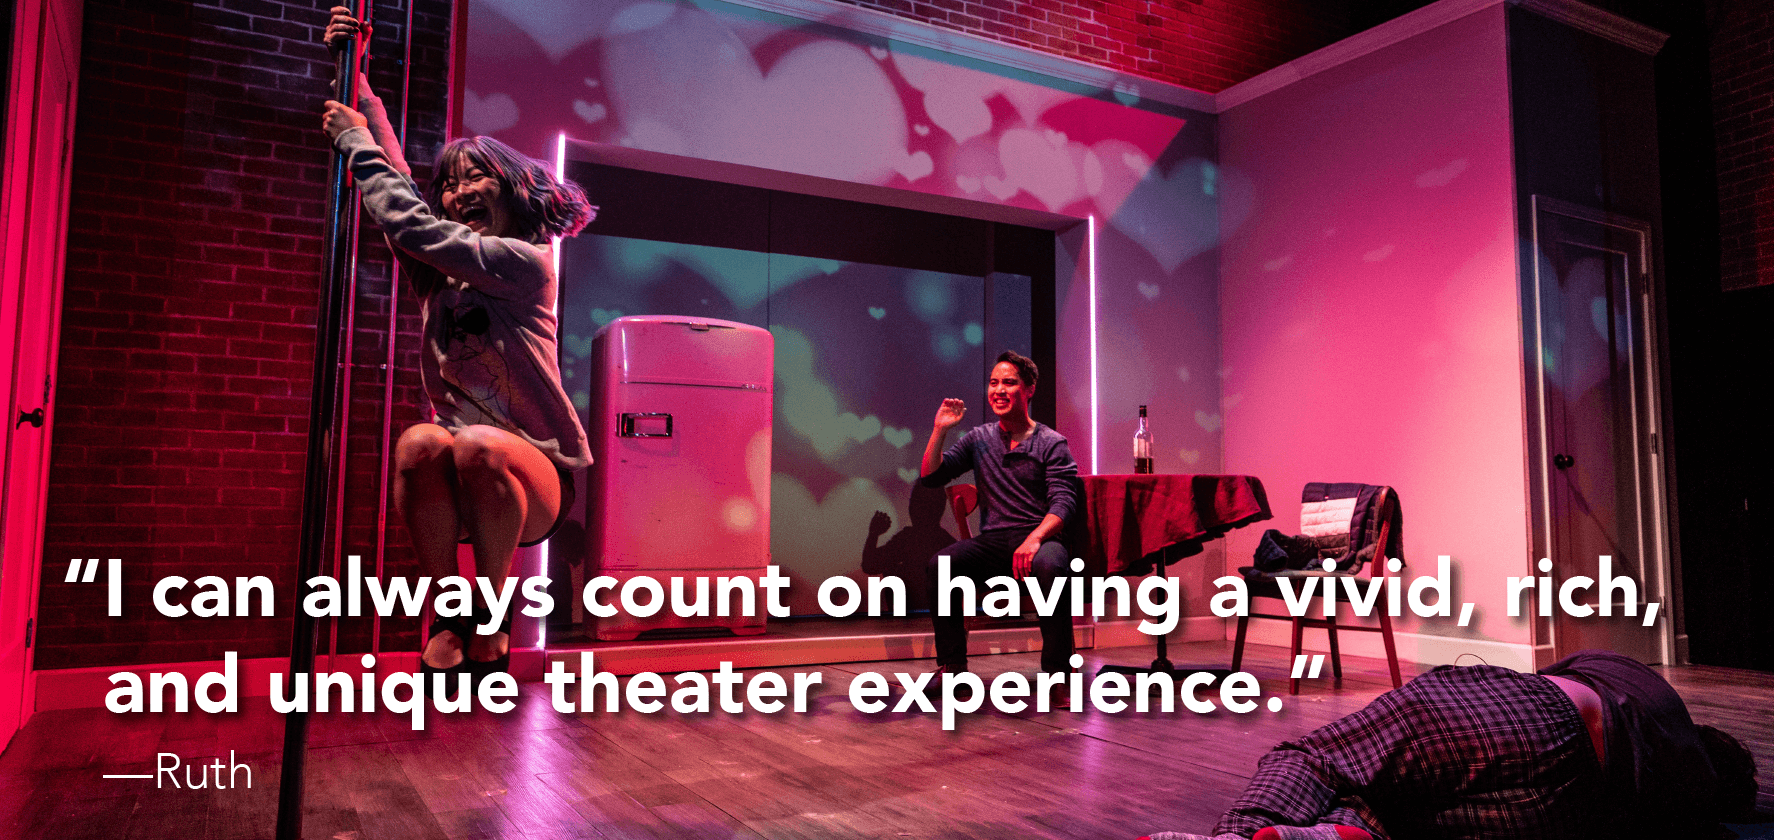 ‘I can always count on having a vivid, rich, and unique theater experience.’  —Ruth